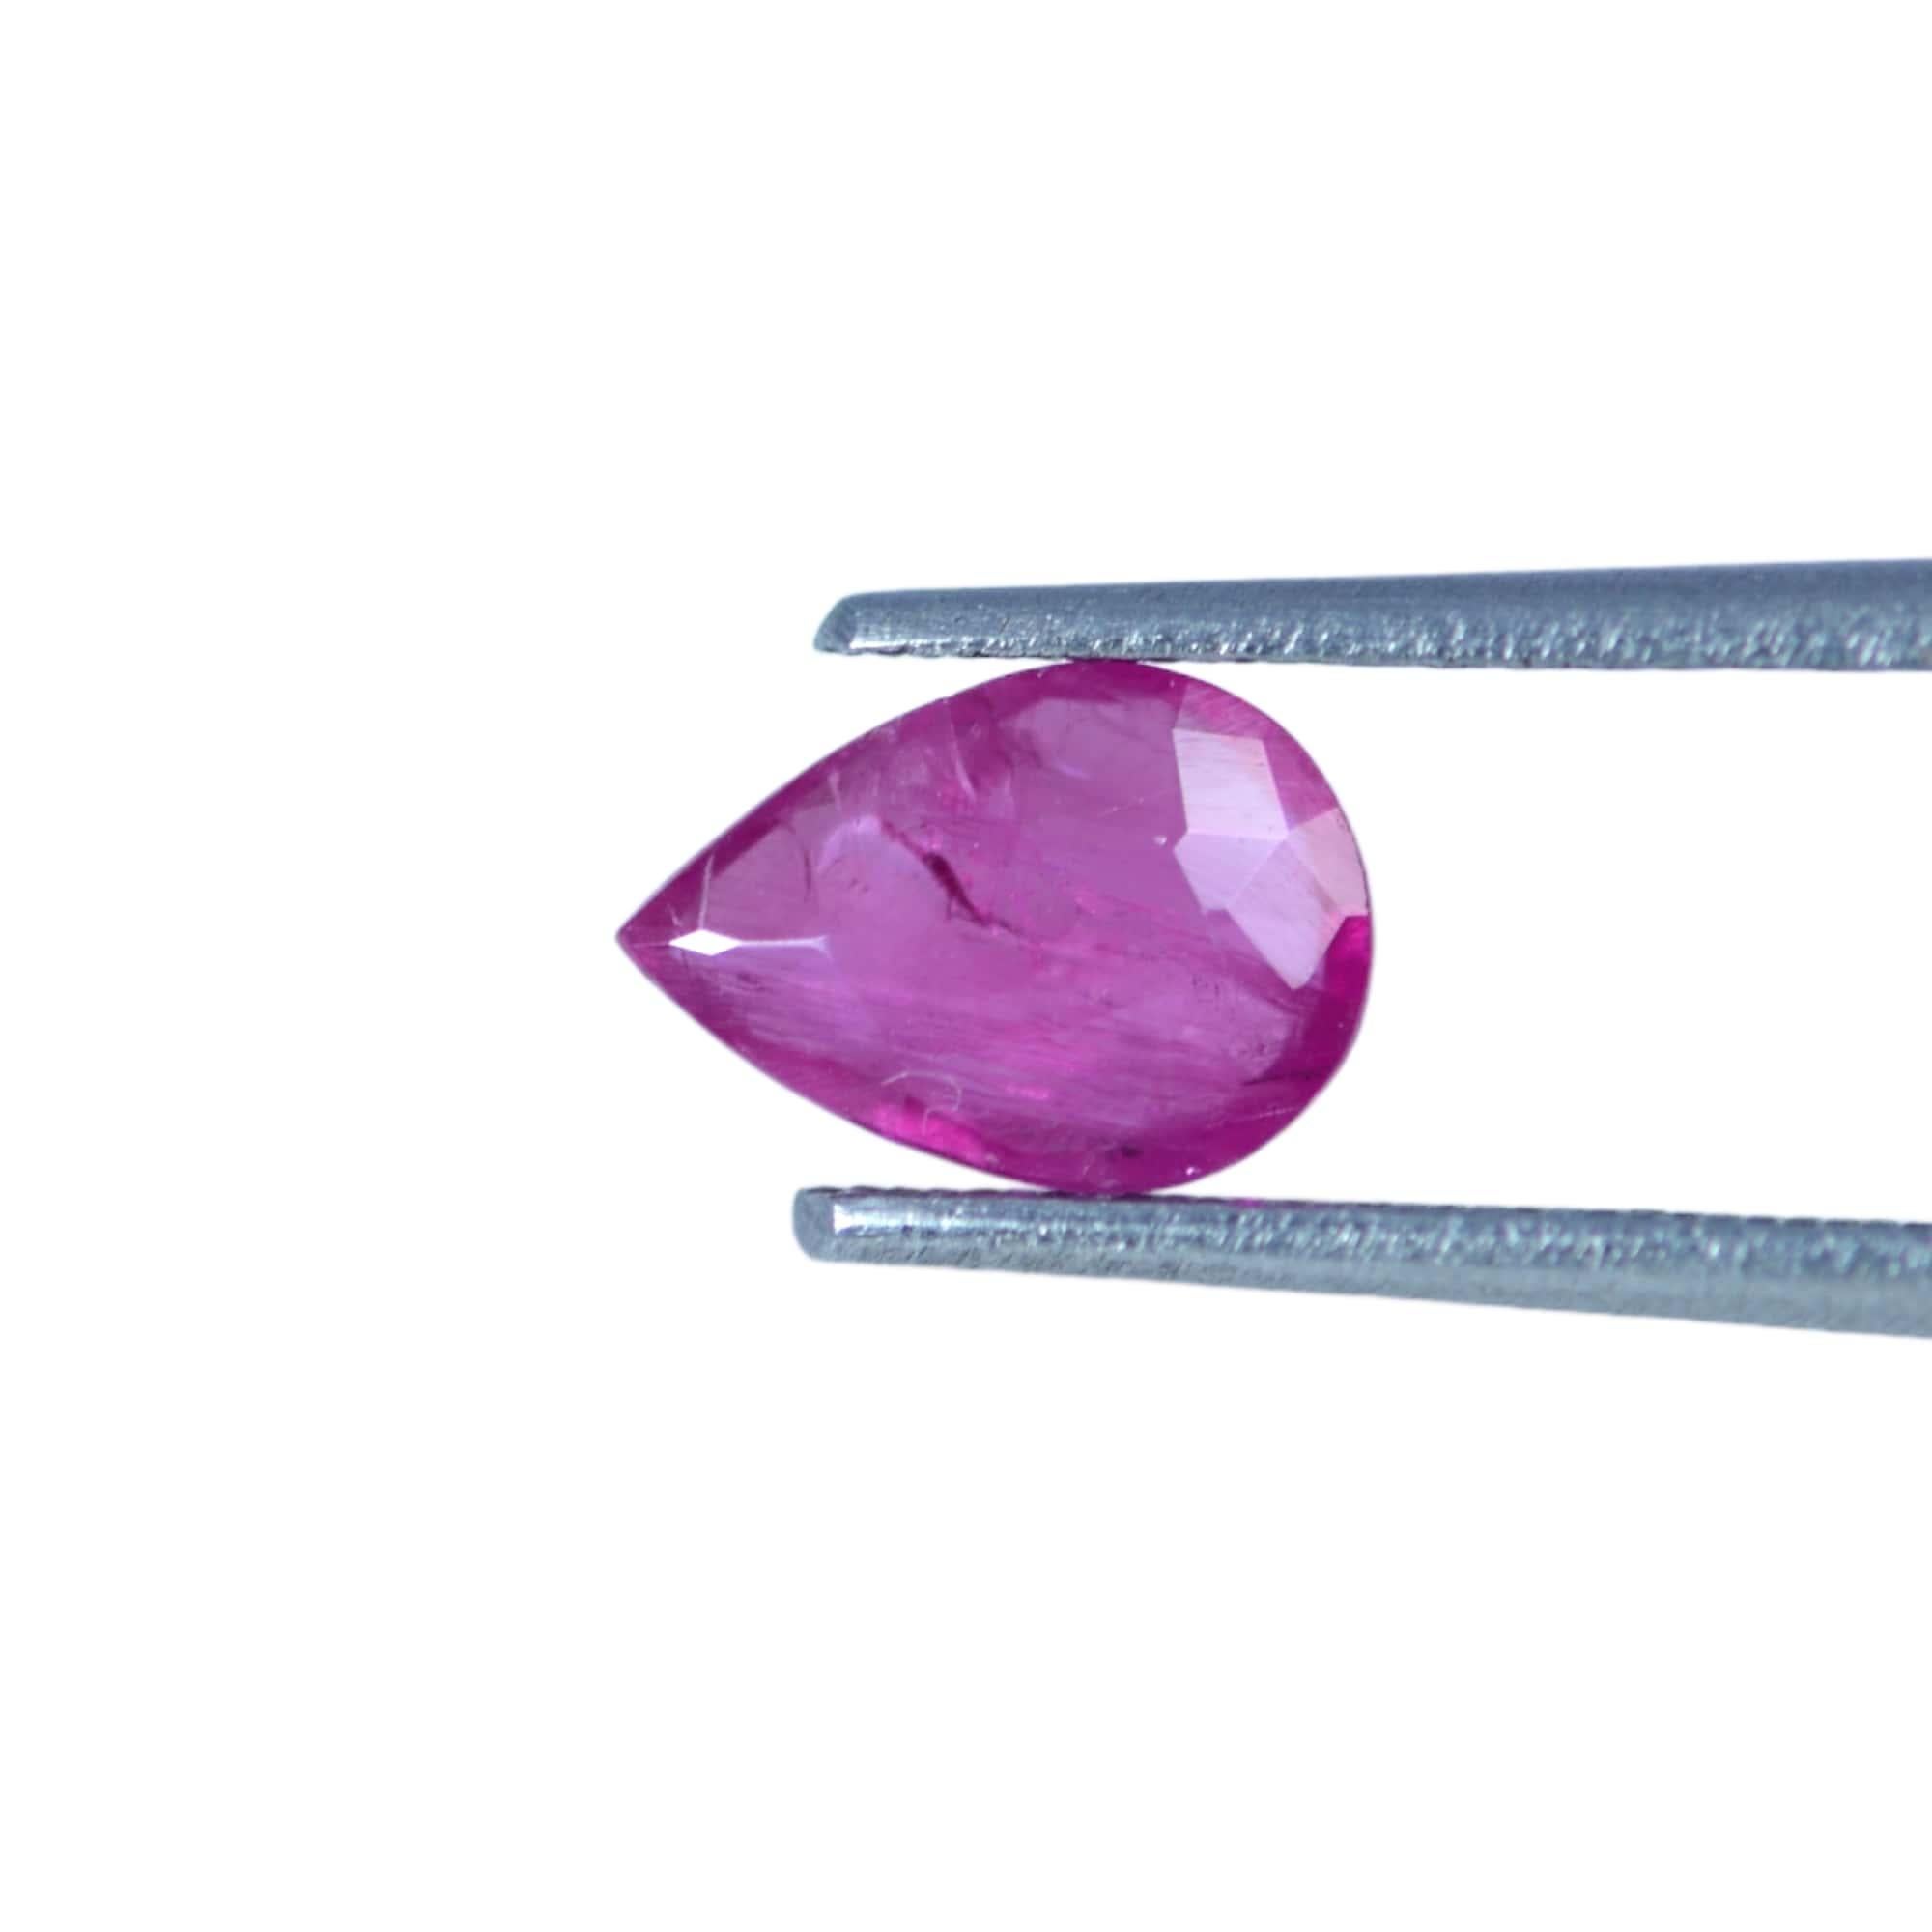 Species : Natural Corundum
Variety : Natural Ruby
Shape and Cut : Pear Mixed Cut
Weight : 1.16 Carat
Measurements : 7.76 x 5.44 x 2.91 mm
Color : Pink Red
Transparency : Transparent
Certificate number : 310834315
This gemstone is certified from IGI